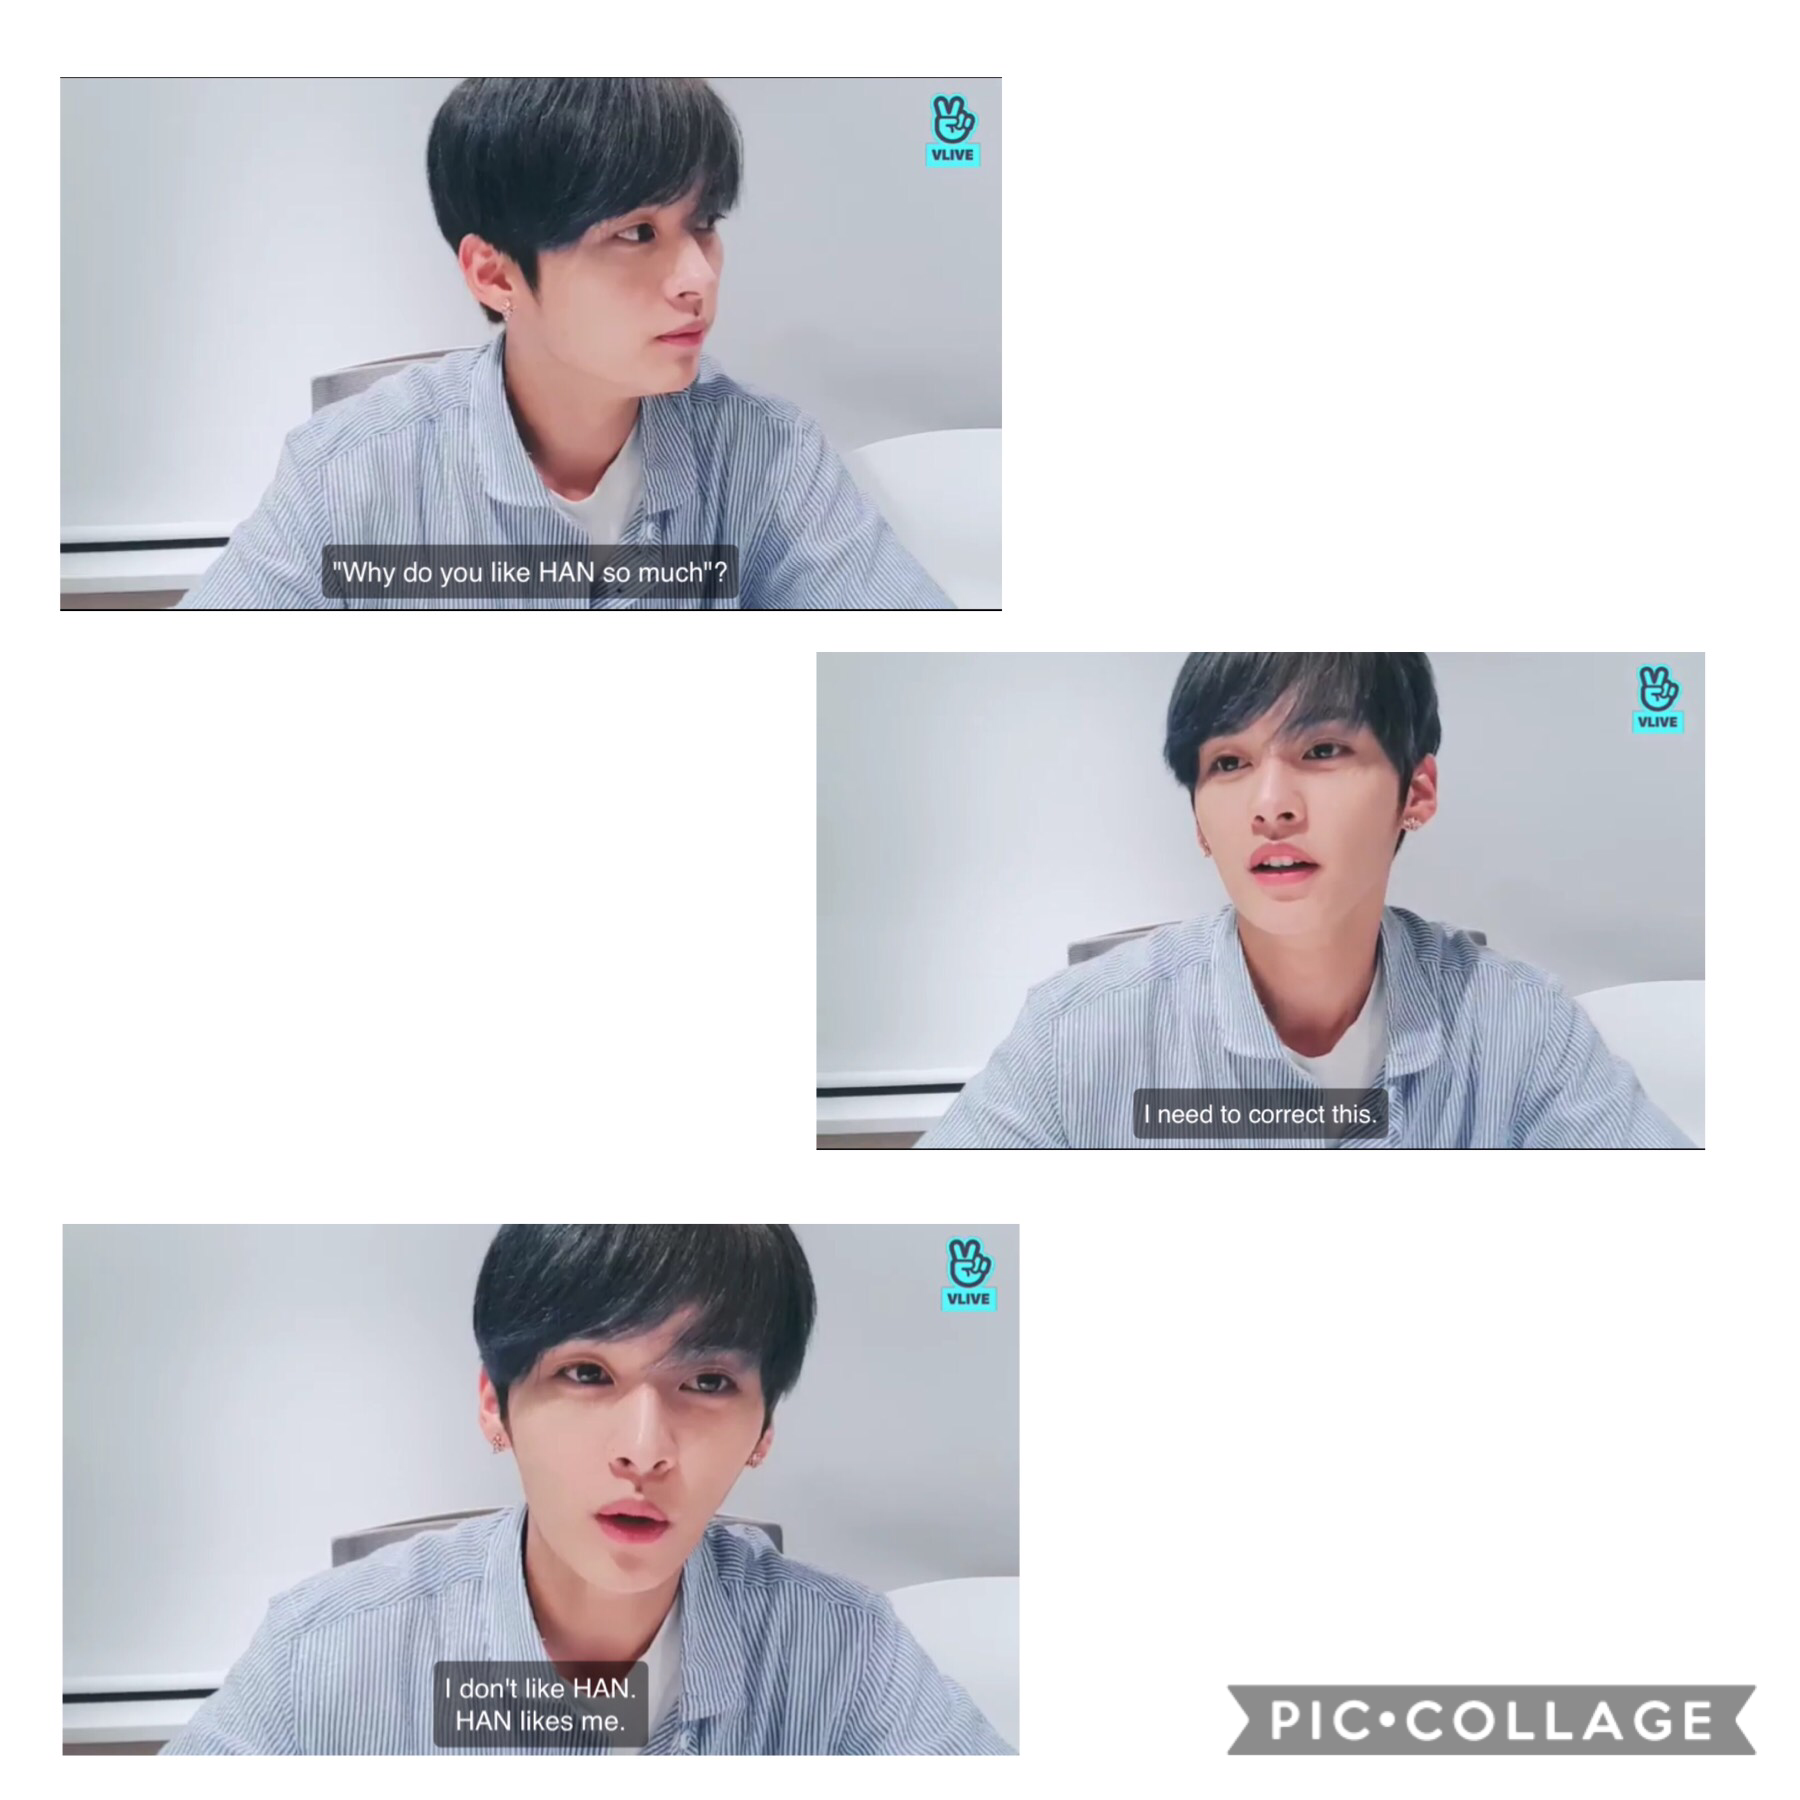 Jisung got exposed lol, Minho said next time he would bring something fun. Maybe it will be the Minsung Vlive that all Minsung shippers have been waiting for.